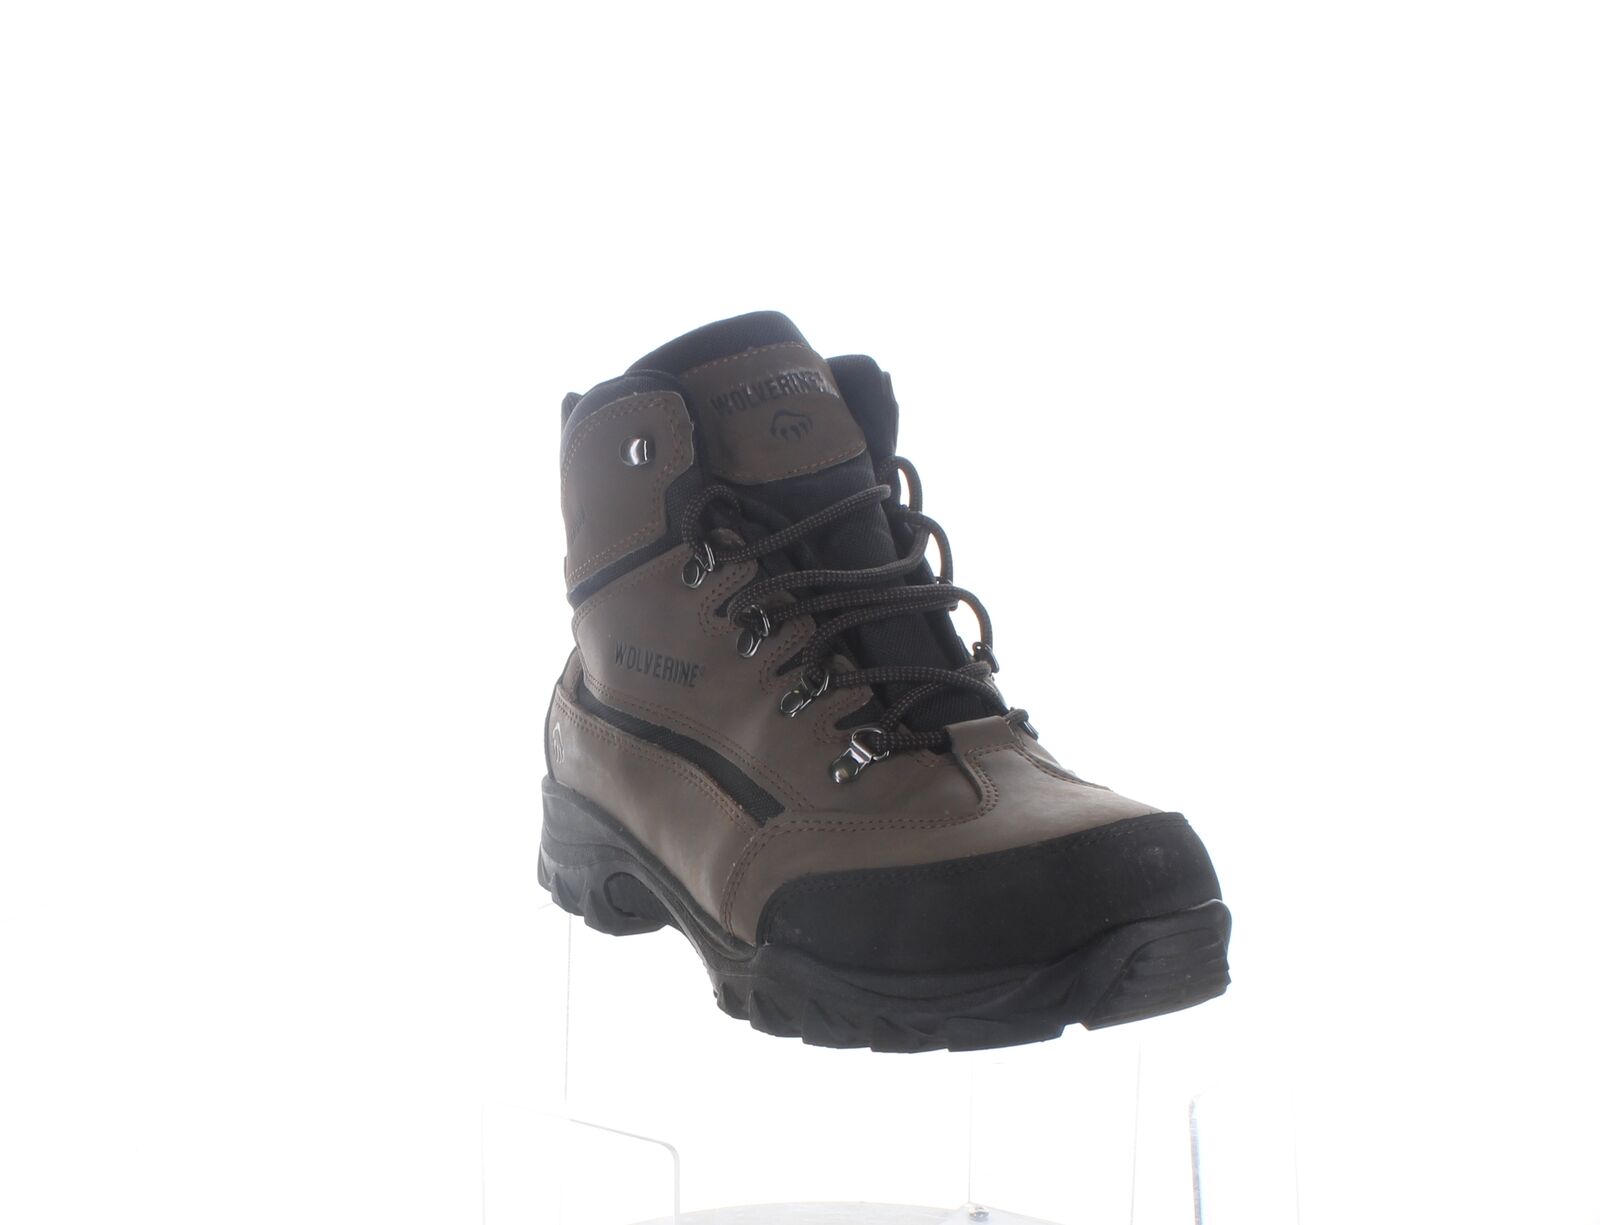 Wolverine Mens Brown Hiking Boots Size 12 (Wide) (3781709)